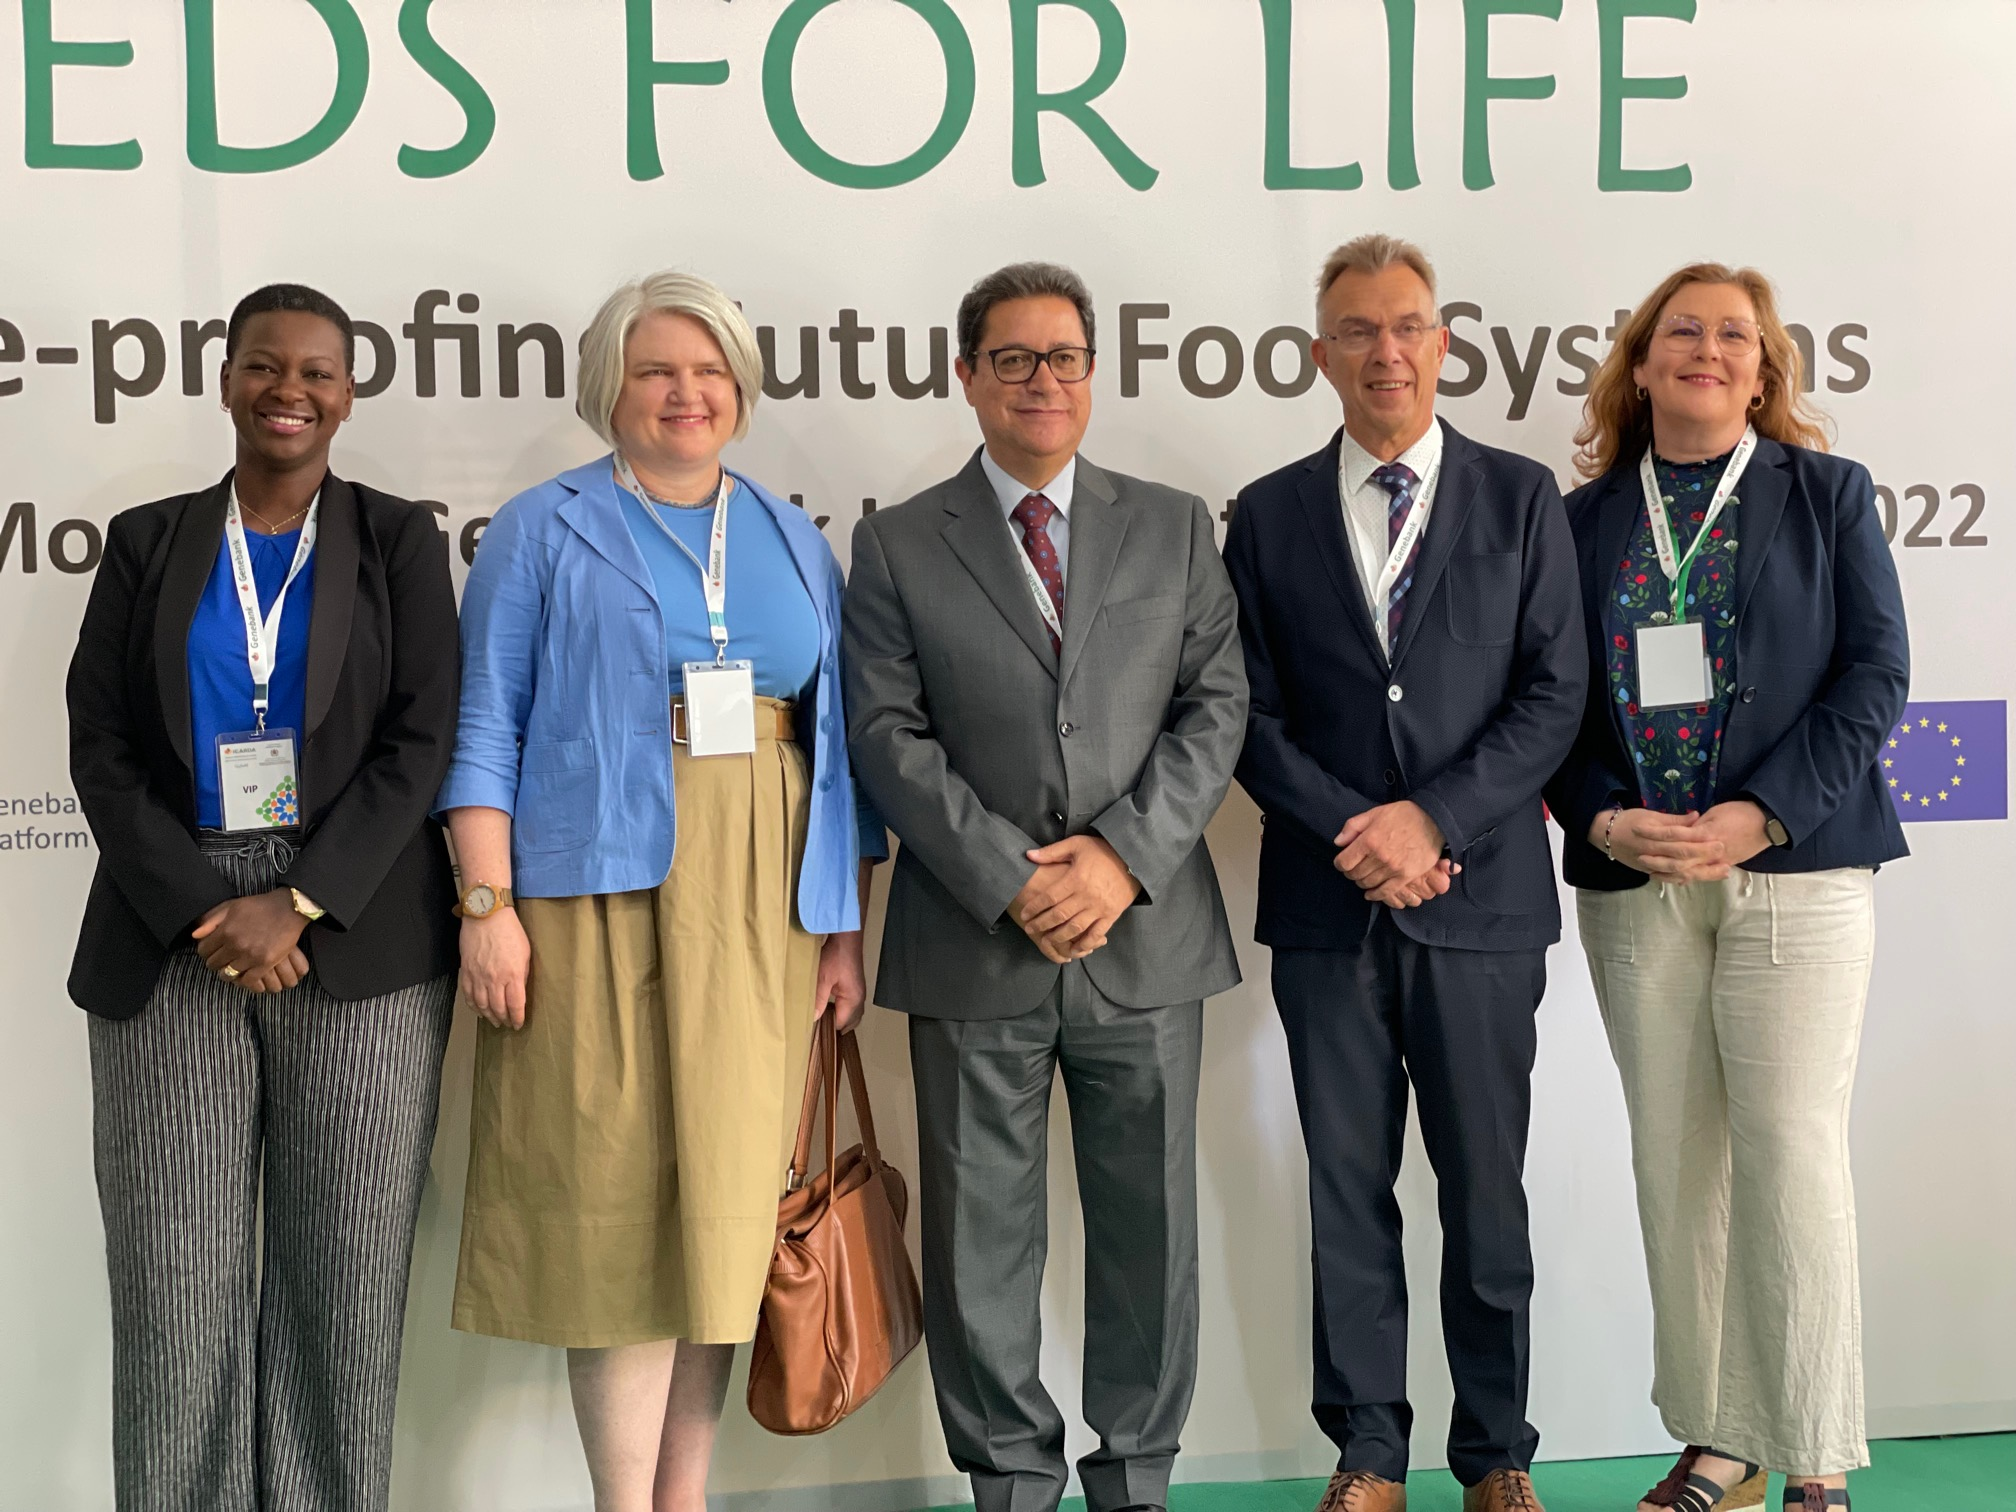 From left to right: Marion Barriskell - CGIAR Global Director of Business Operations and Finance; Sonja Vermeulen - CGIAR Global Director, Genetic Innovation; Aly Abousabaa - CGIAR Regional Director CWANA, and ICARDA's Director-General; Martin Kropff - CGIAR Global Director, Resilient Agri-Food Systems; Fiona Bourdin-Farrell - CGIAR Global Director, People and Culture